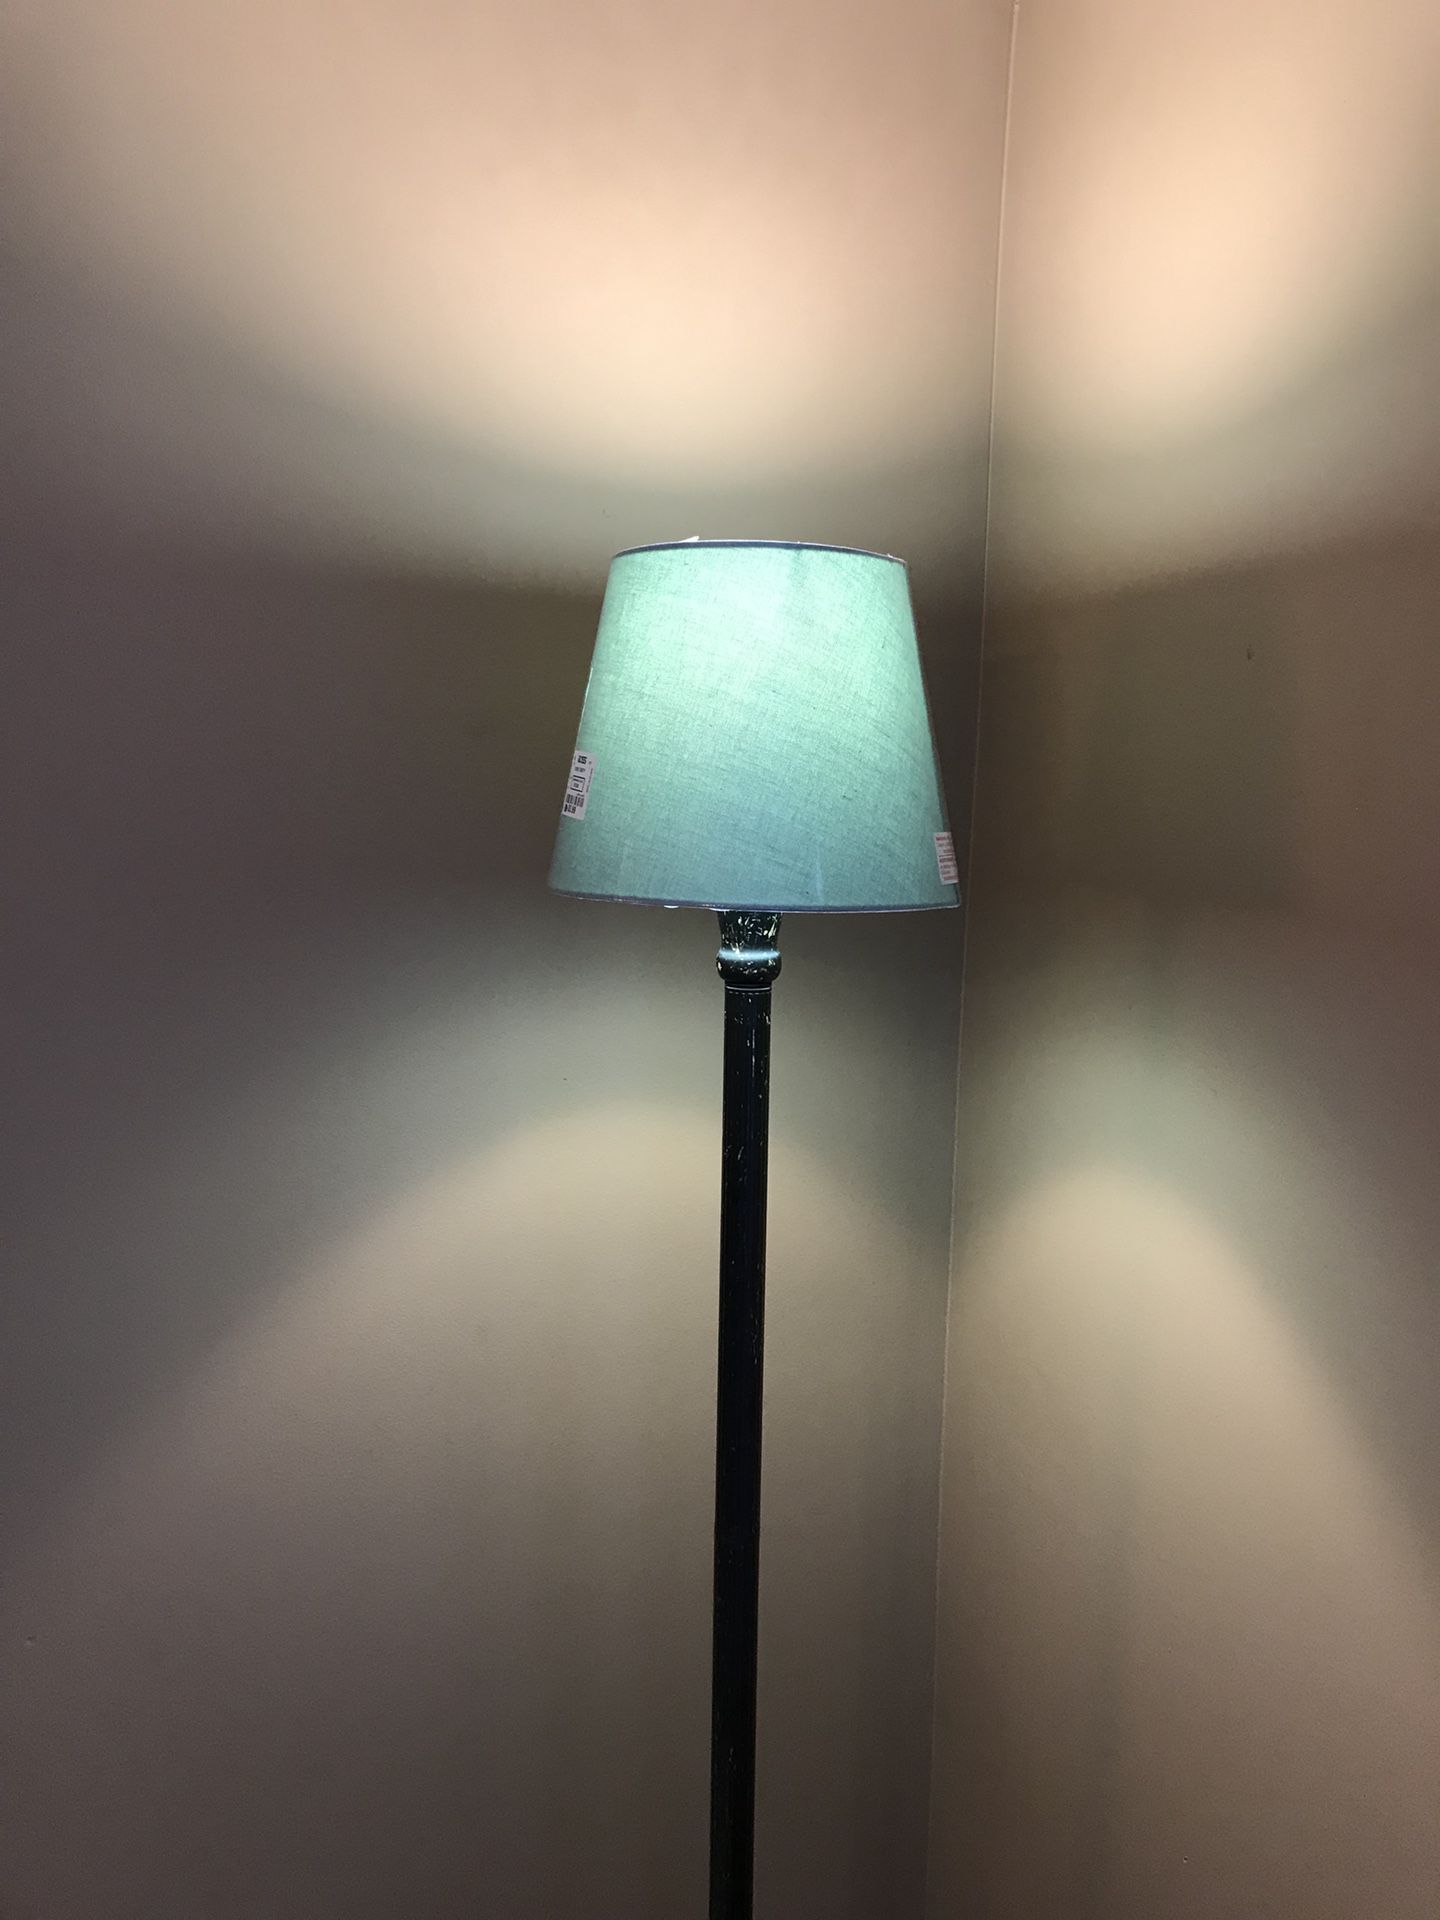 Floor Lamp! Antique style, Brand new turquoise shade. CHEAP, MOVING